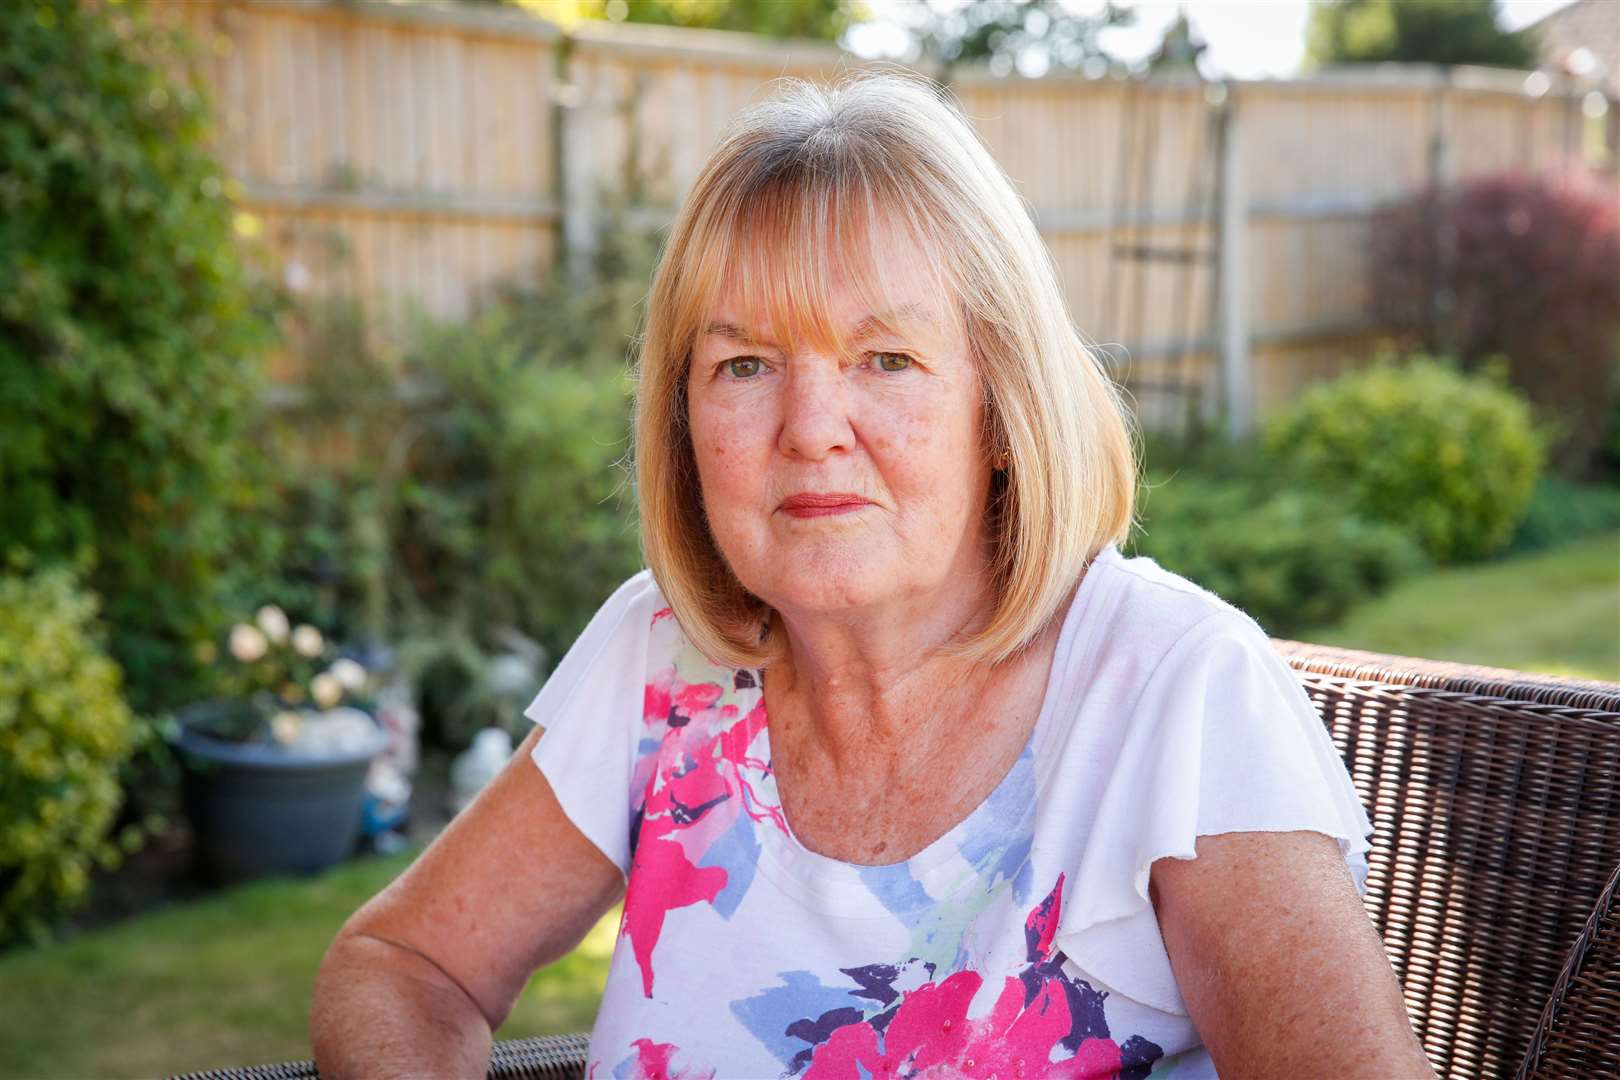 Denise Petro of Sittingbourne is angry over plans by the clinical commissioning group to close the Frank Lloyd Dementia Centre at Sittingbourne Memorial Hospital. Picture: Matthew Walker